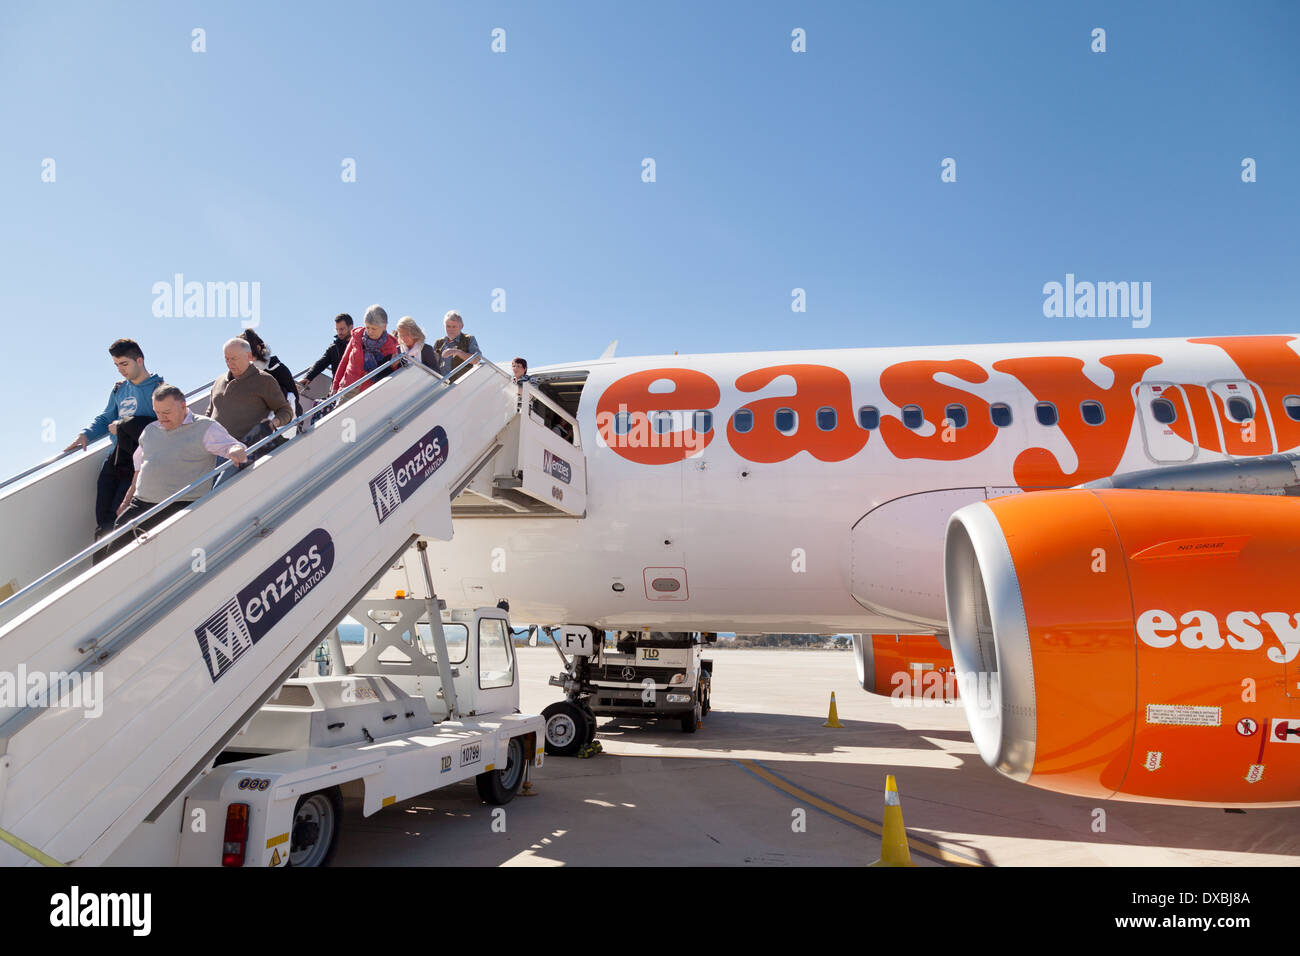 Easyjet plane, passengers getting off or disembarking from the flight, Almeria airport Spain Europe Stock Photo